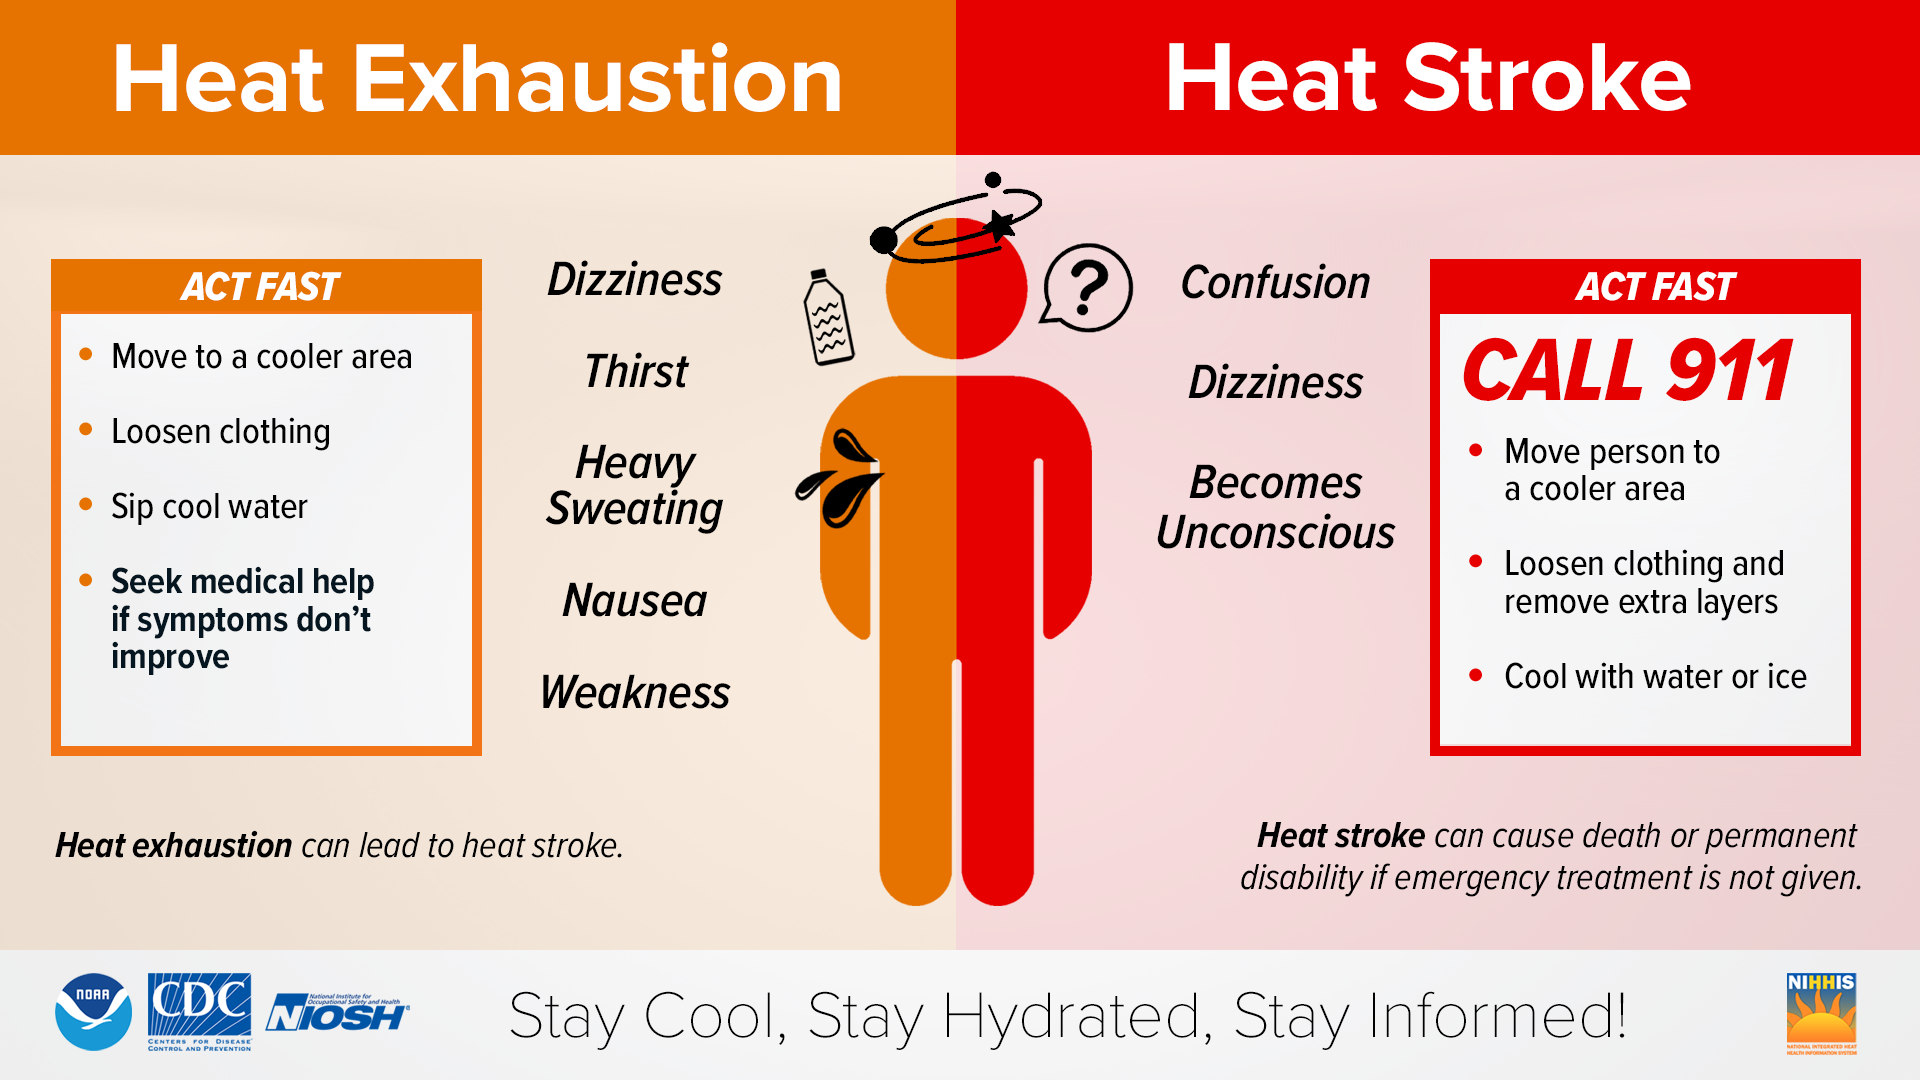 Drawing of a person with a circle around the head, with a question mark, a water bottle, and heavy sweating. Heat Exhaustion: Act Fast - Move to a cooler area; loosen clothing, sip cool water, seek medical help if symptoms don't improve. Dizziness, thirst, heavy sweating, nausea, and weakness. Heat exhaustion can lead to heat stroke. Heat Stroke: Act Fast - Call 911, move person to a cooler area, loosen clothing and remove extra layers, cool with water or ice. Confusion, dizziness, become unconscious, Heat stroke can cause death or permanent disability if emergency treatment is not given.